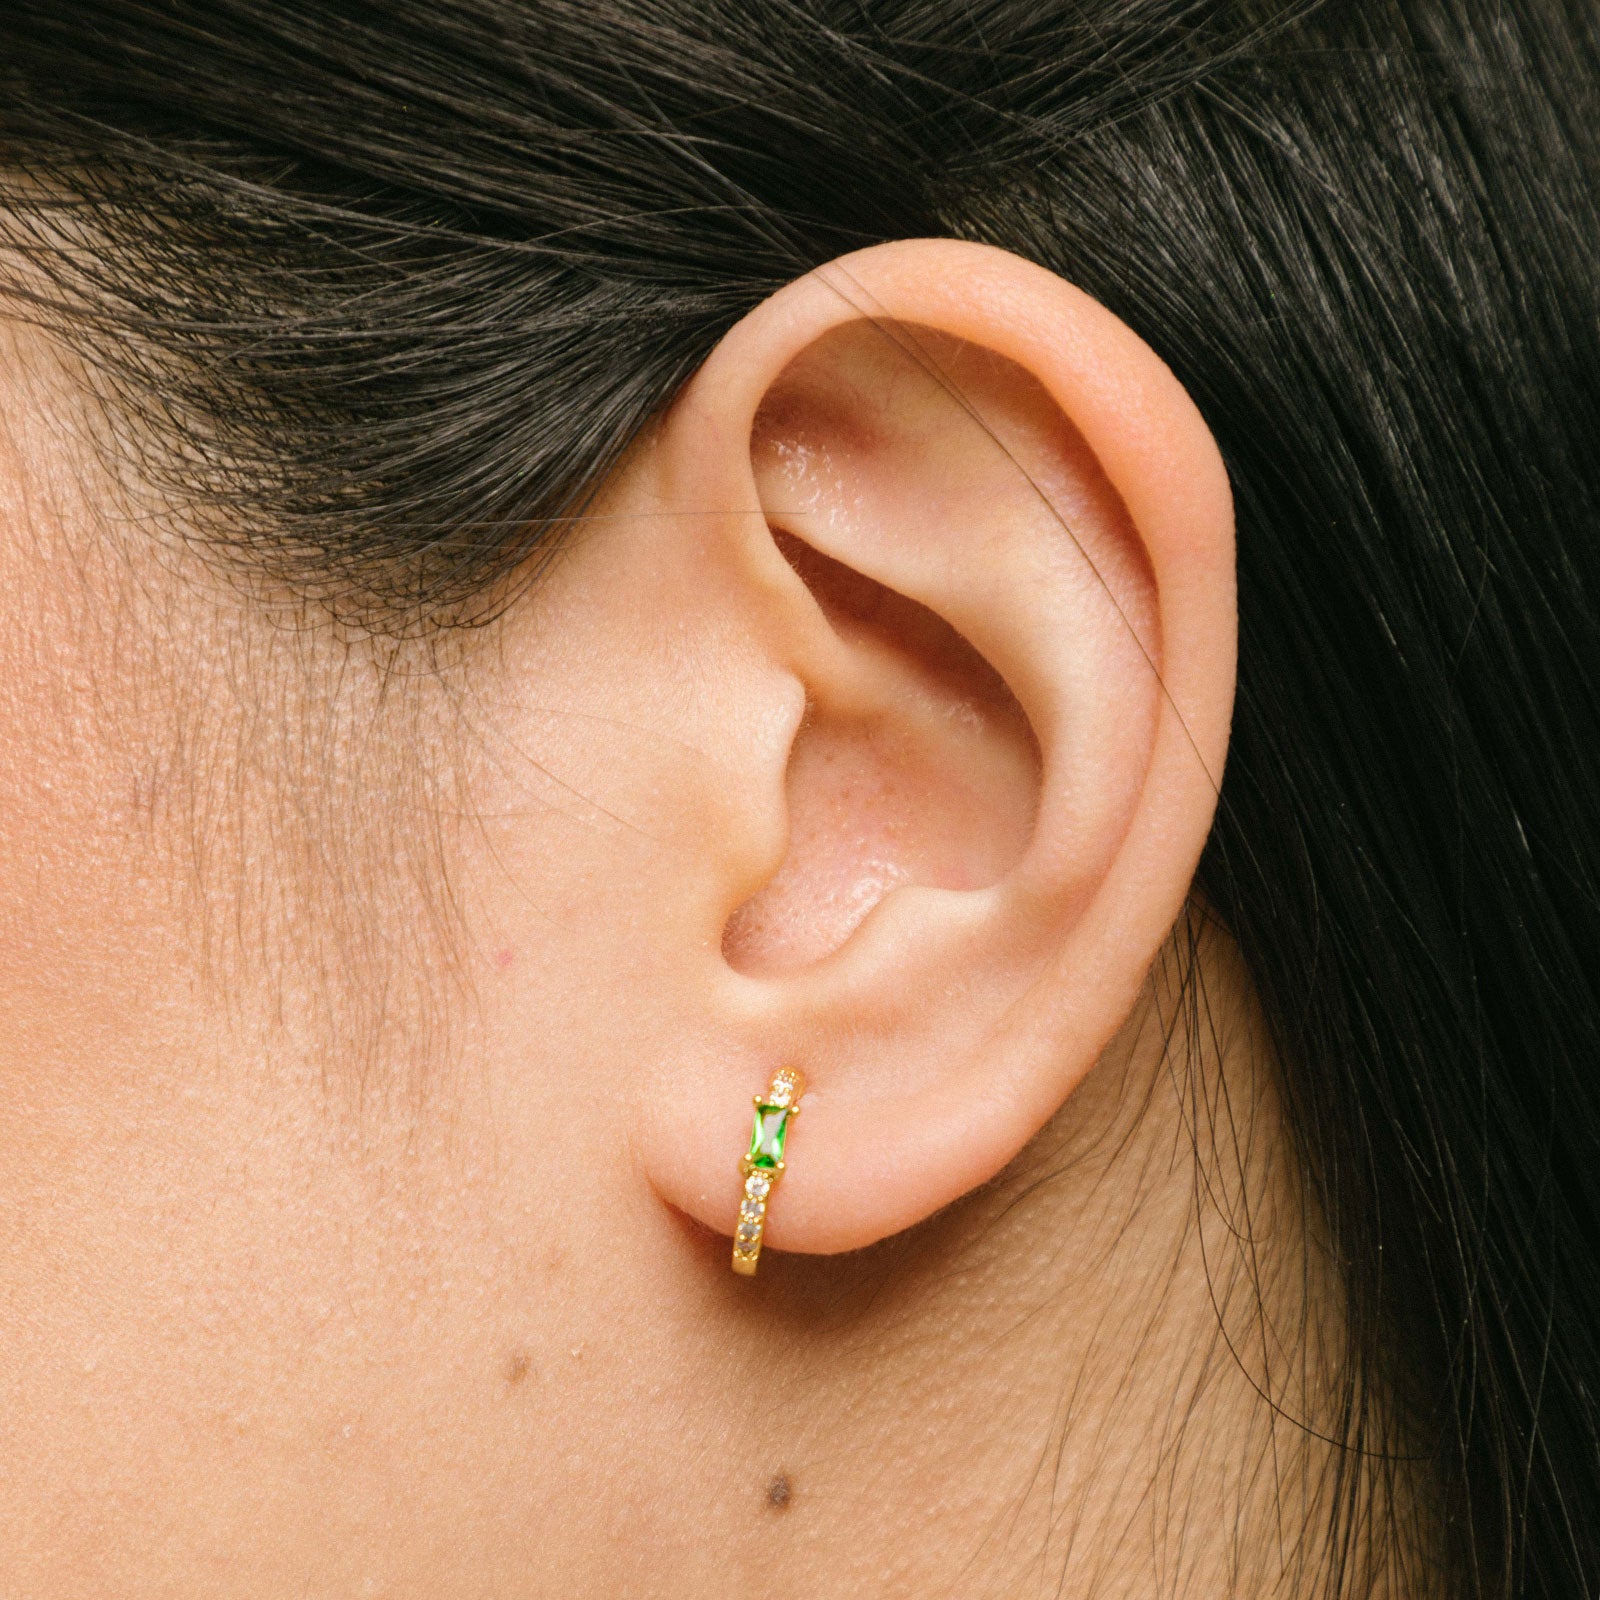 A model wearing the Emerald Pavé Huggie Clip-On Earrings features a closure type of mosquito coil clip-on earrings. They are suitable for all types of ear shapes and sizes, and are comfortable to wear for up to 24 hours. The hold strength is medium, allowing you to gently adjust the padding forward once on the ear. Crafted with 18k gold plated metal alloy and cubic zirconia, these earrings are non-tarnish and water-resistant.